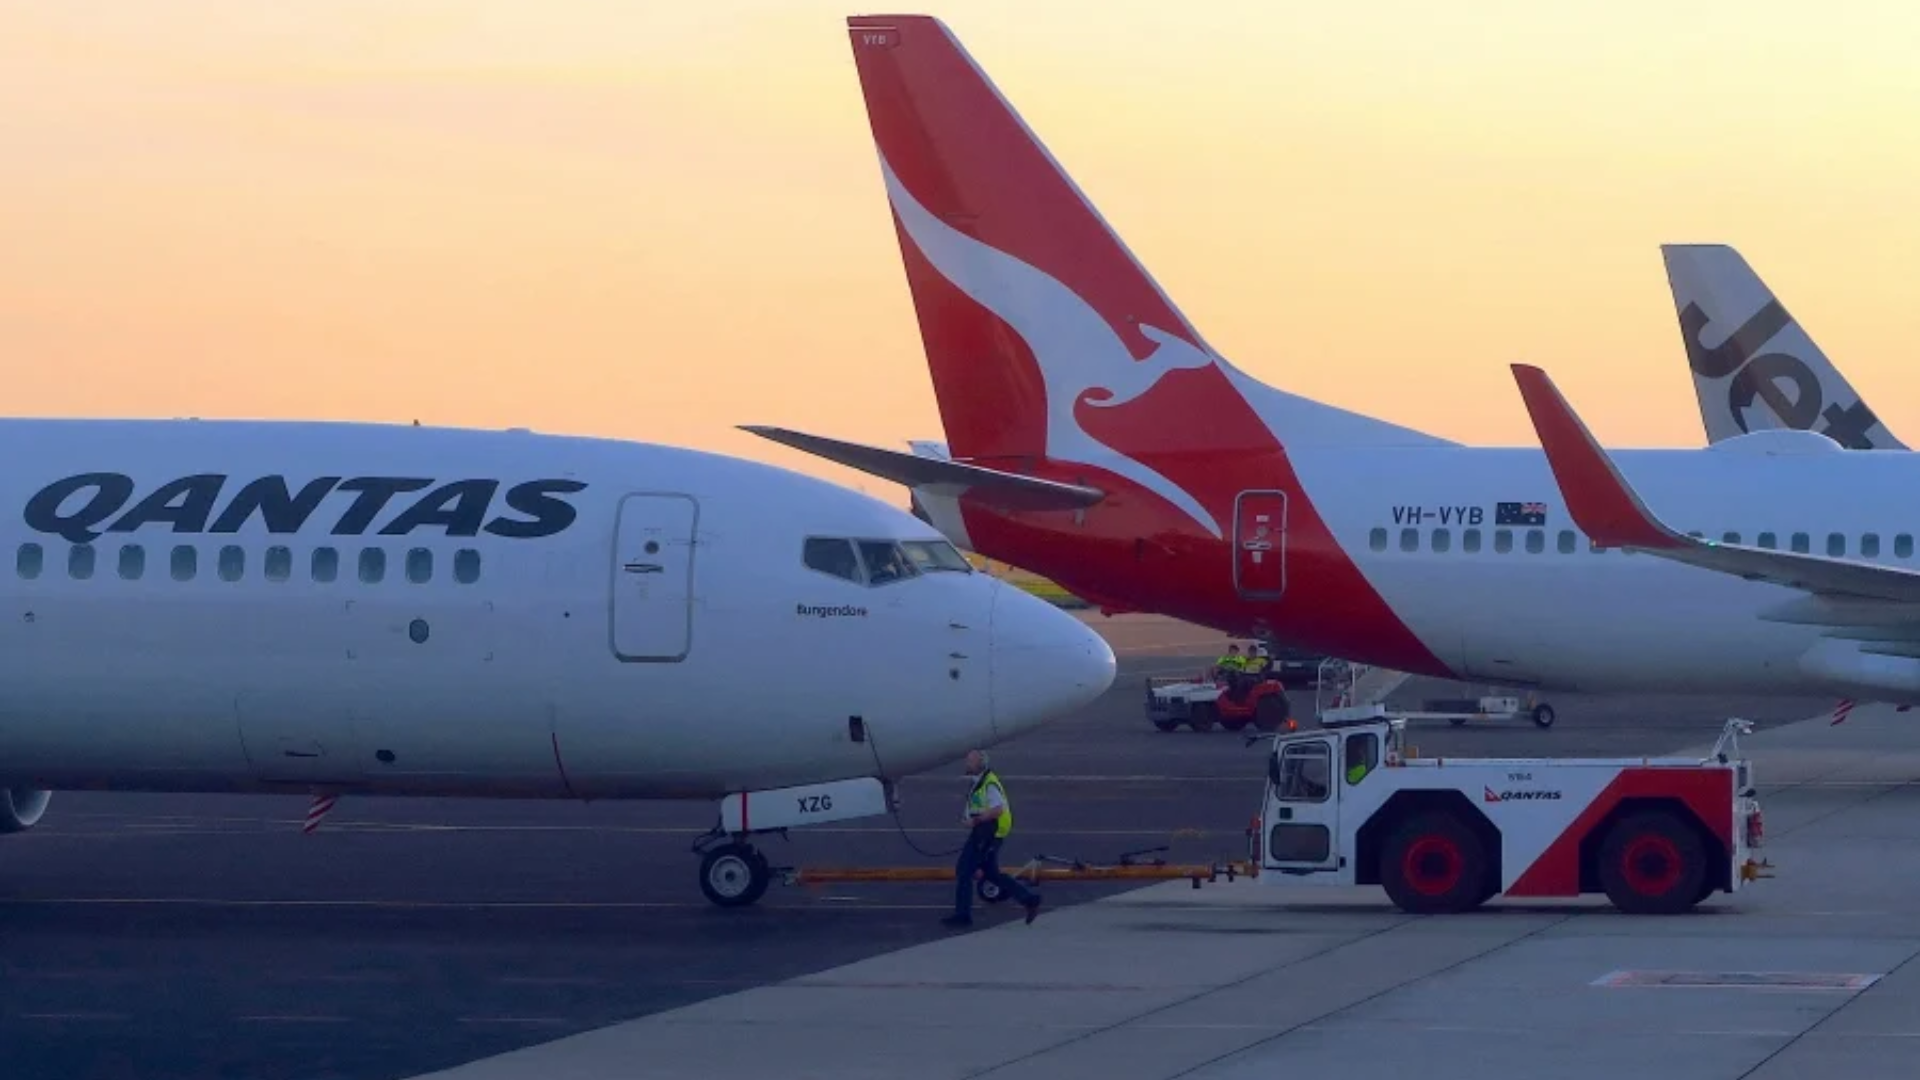 Australian Airline to Pay $66 Million Fine Over “Ghost Flights” Scandal